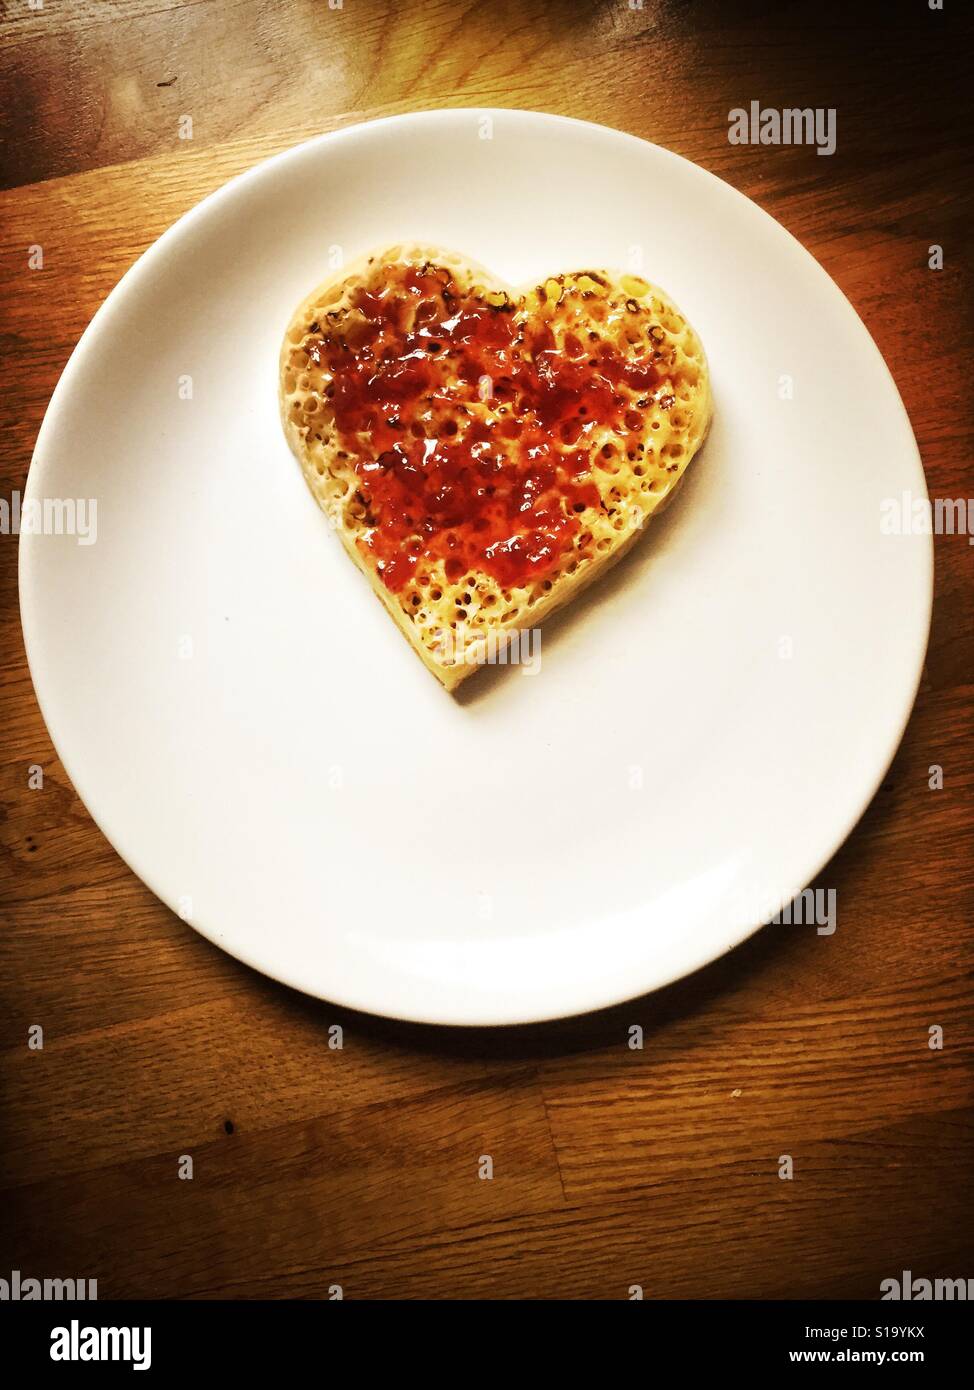 A crumpet in the shape of a heart covered with strawberry jam. Stock Photo